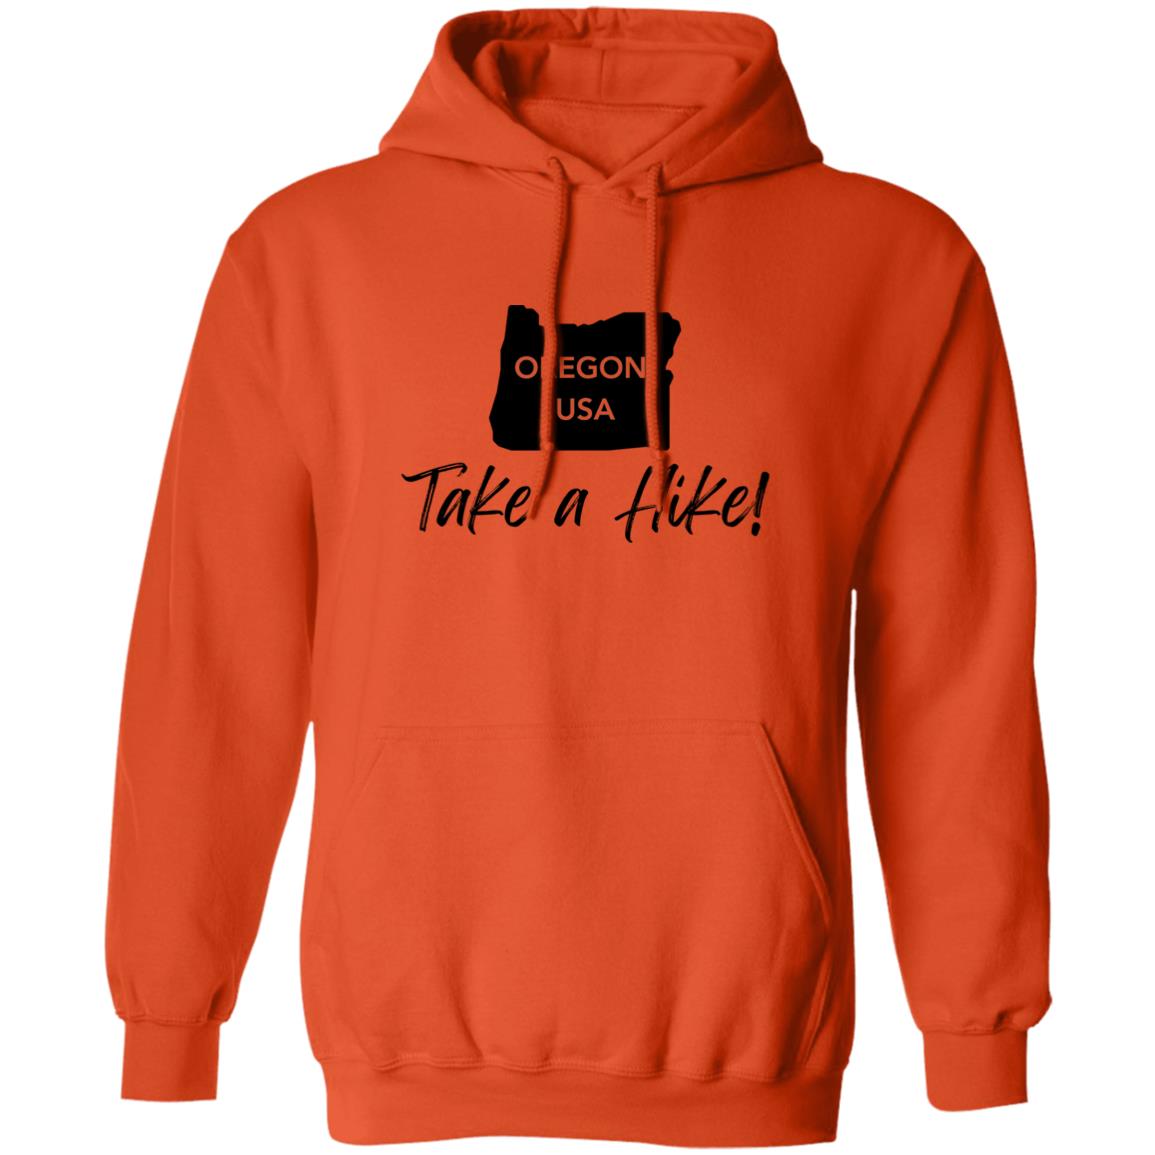 Comfy G185 Pullover Hoodie for men or women - Take a Hike Oregon black print